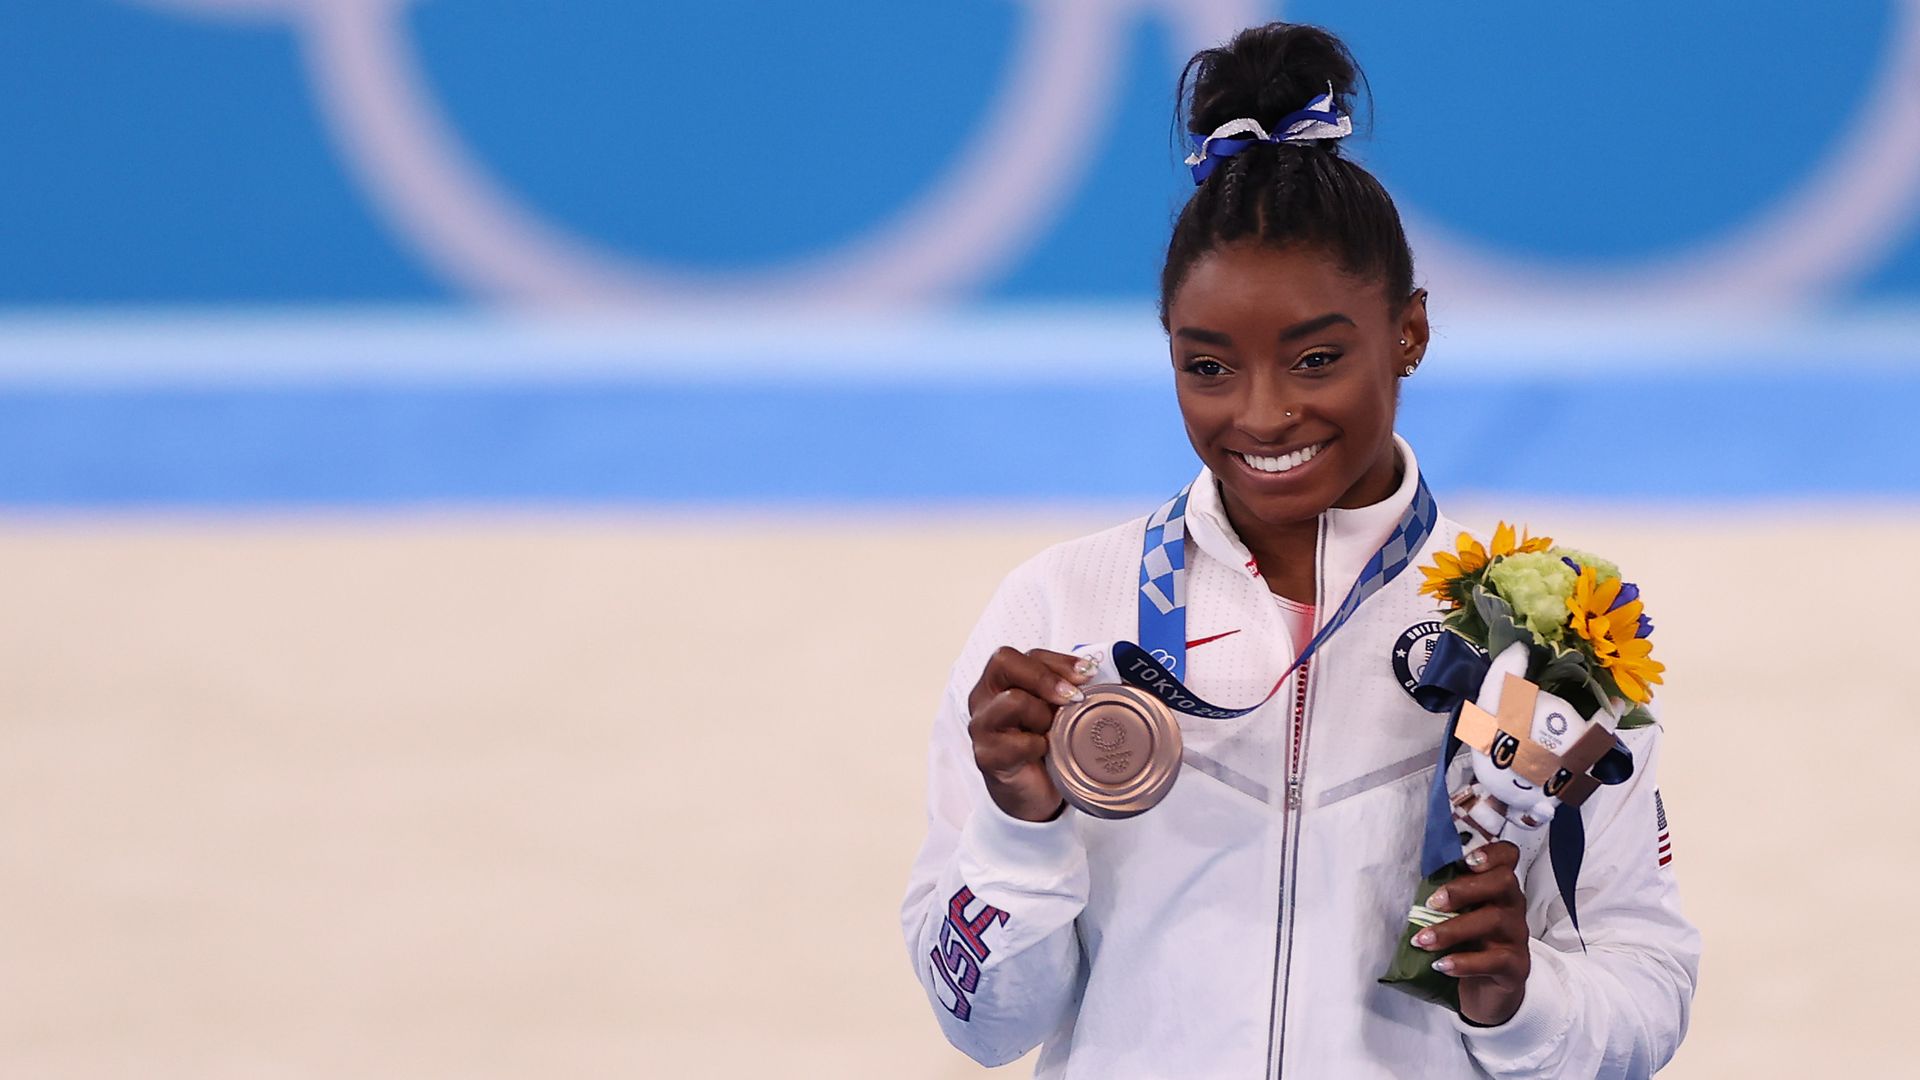 American Simone Biles with the bronze medal at the Olympic Women's Balance Beam Final medal ceremony in Tokyo, Japan, on Aug. 3.